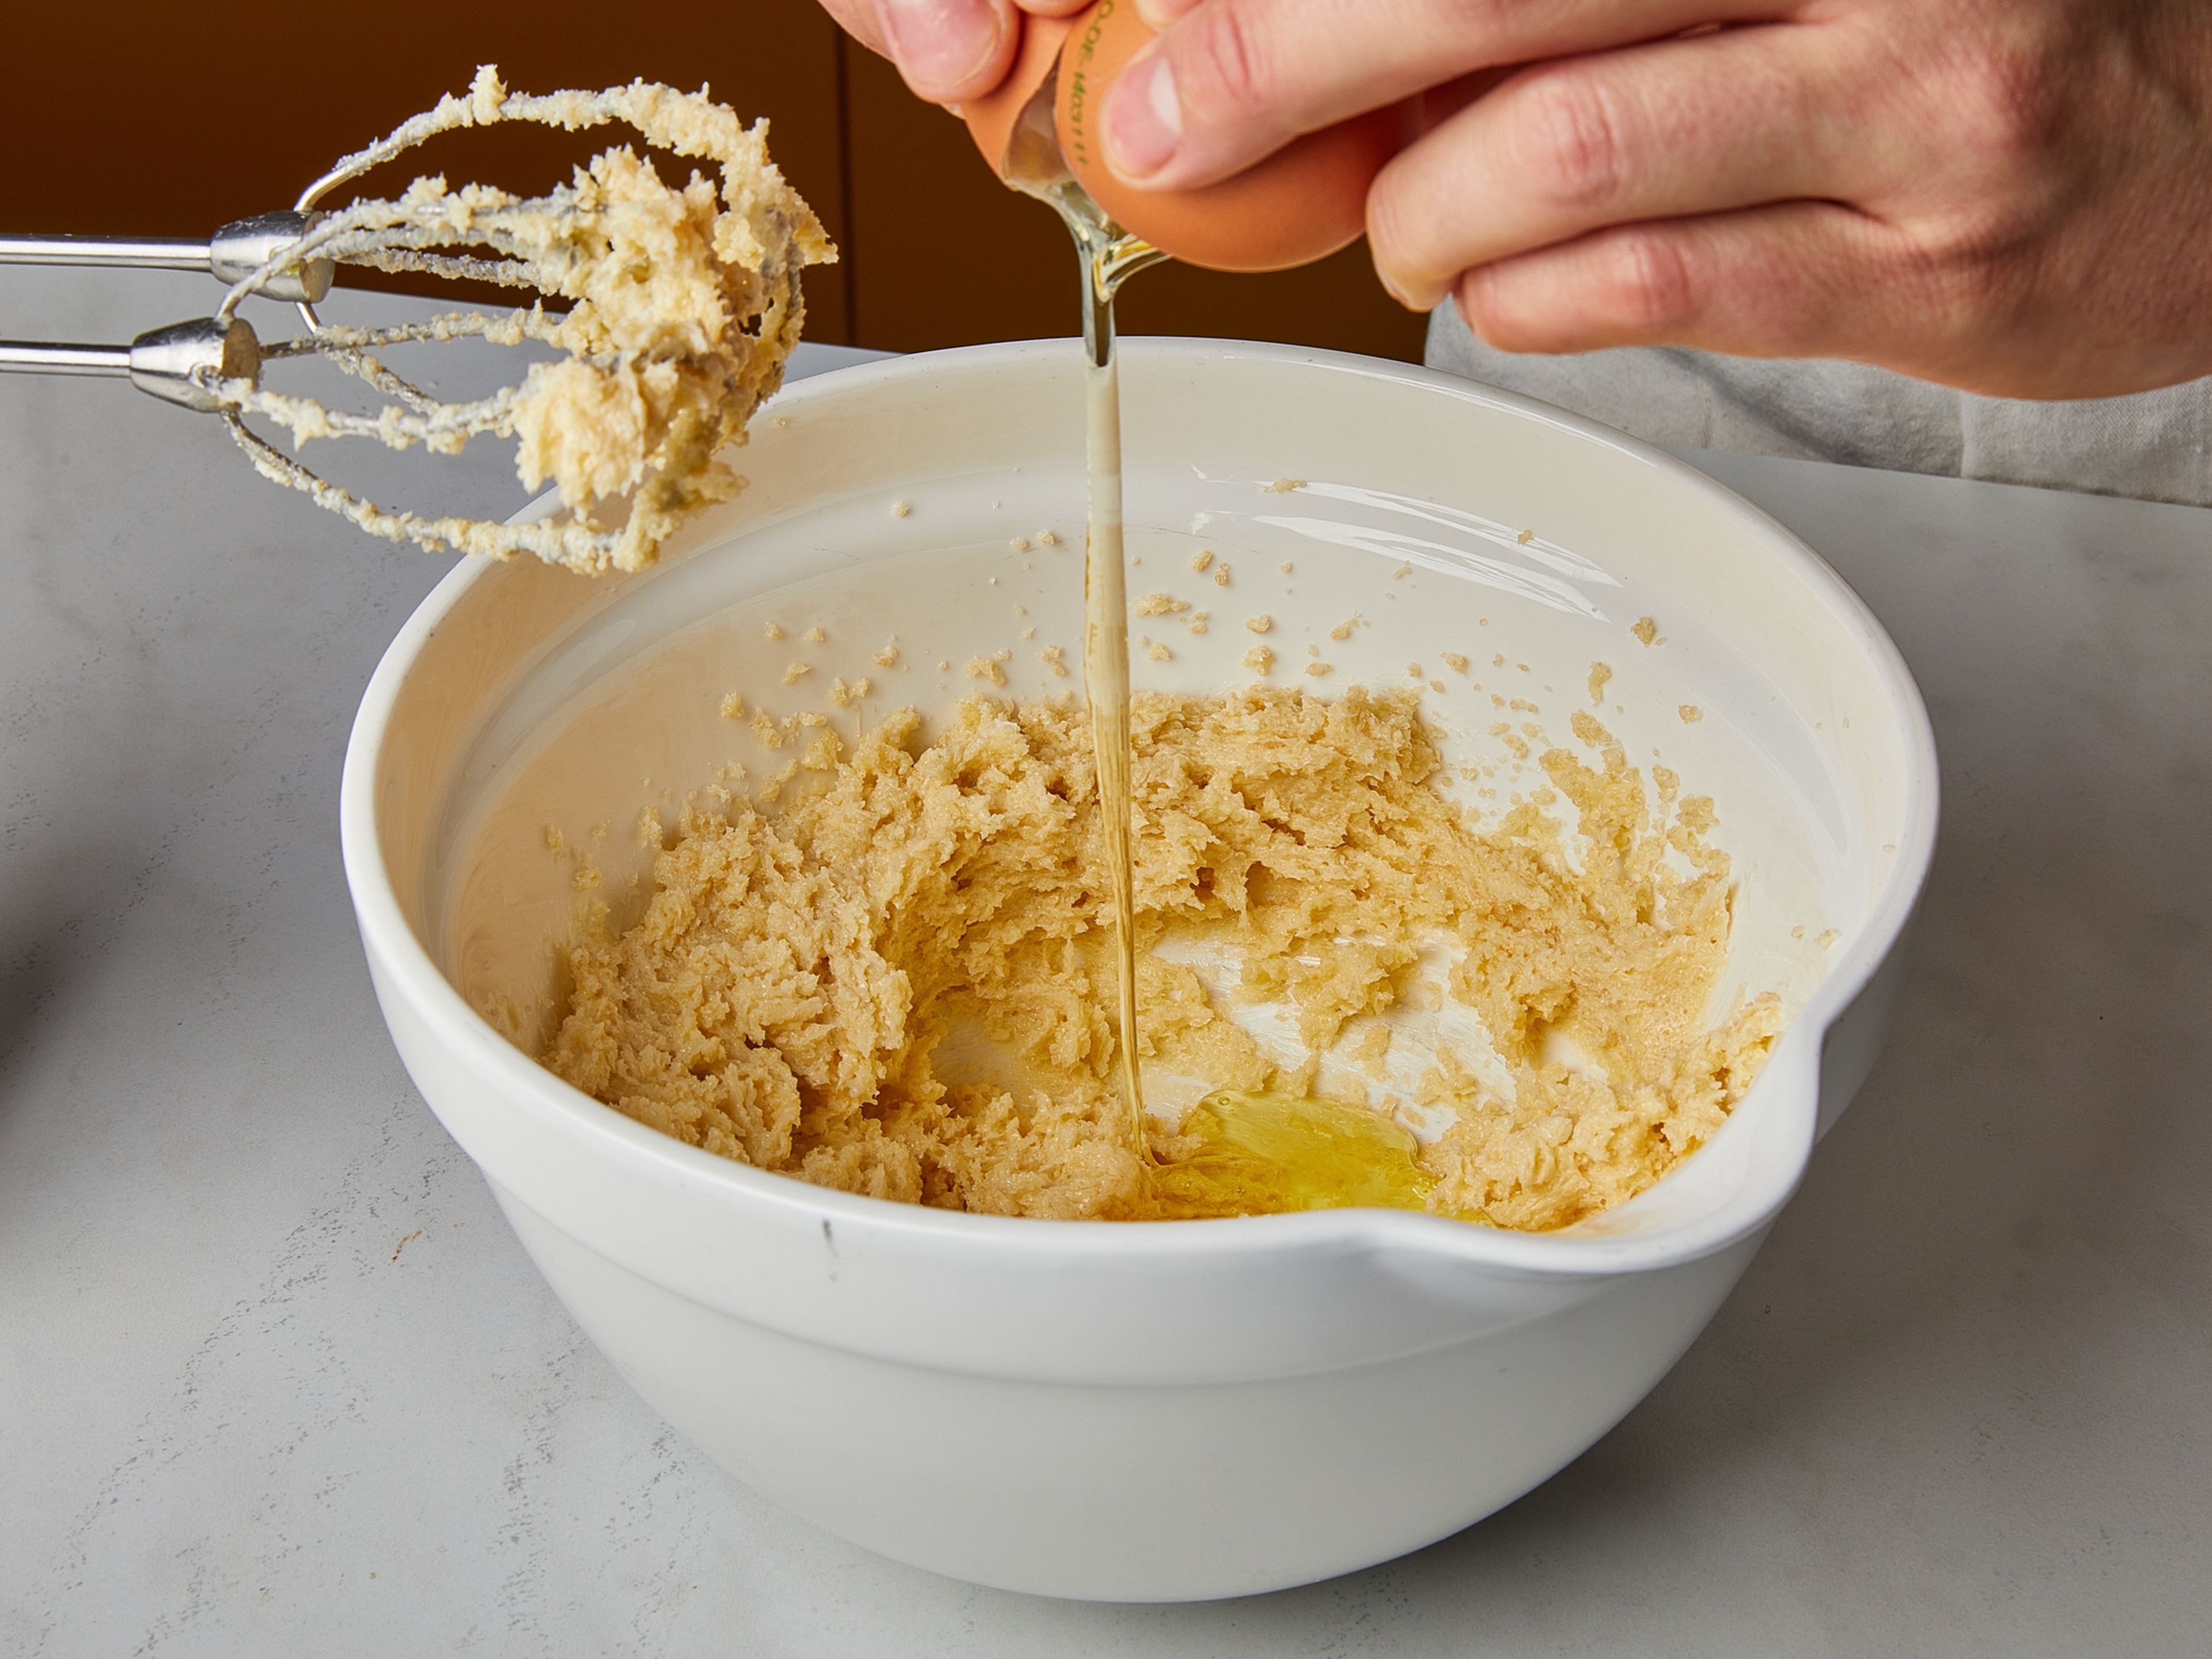 In a large bowl, add butter, both types of sugar and the vanilla extract. Use a hand mixer to beat for approx. 5–7 min. until light and fluffy. Add the egg and beat together with the cream. Carefully fold in the flour and orange zest until everything is evenly mixed.